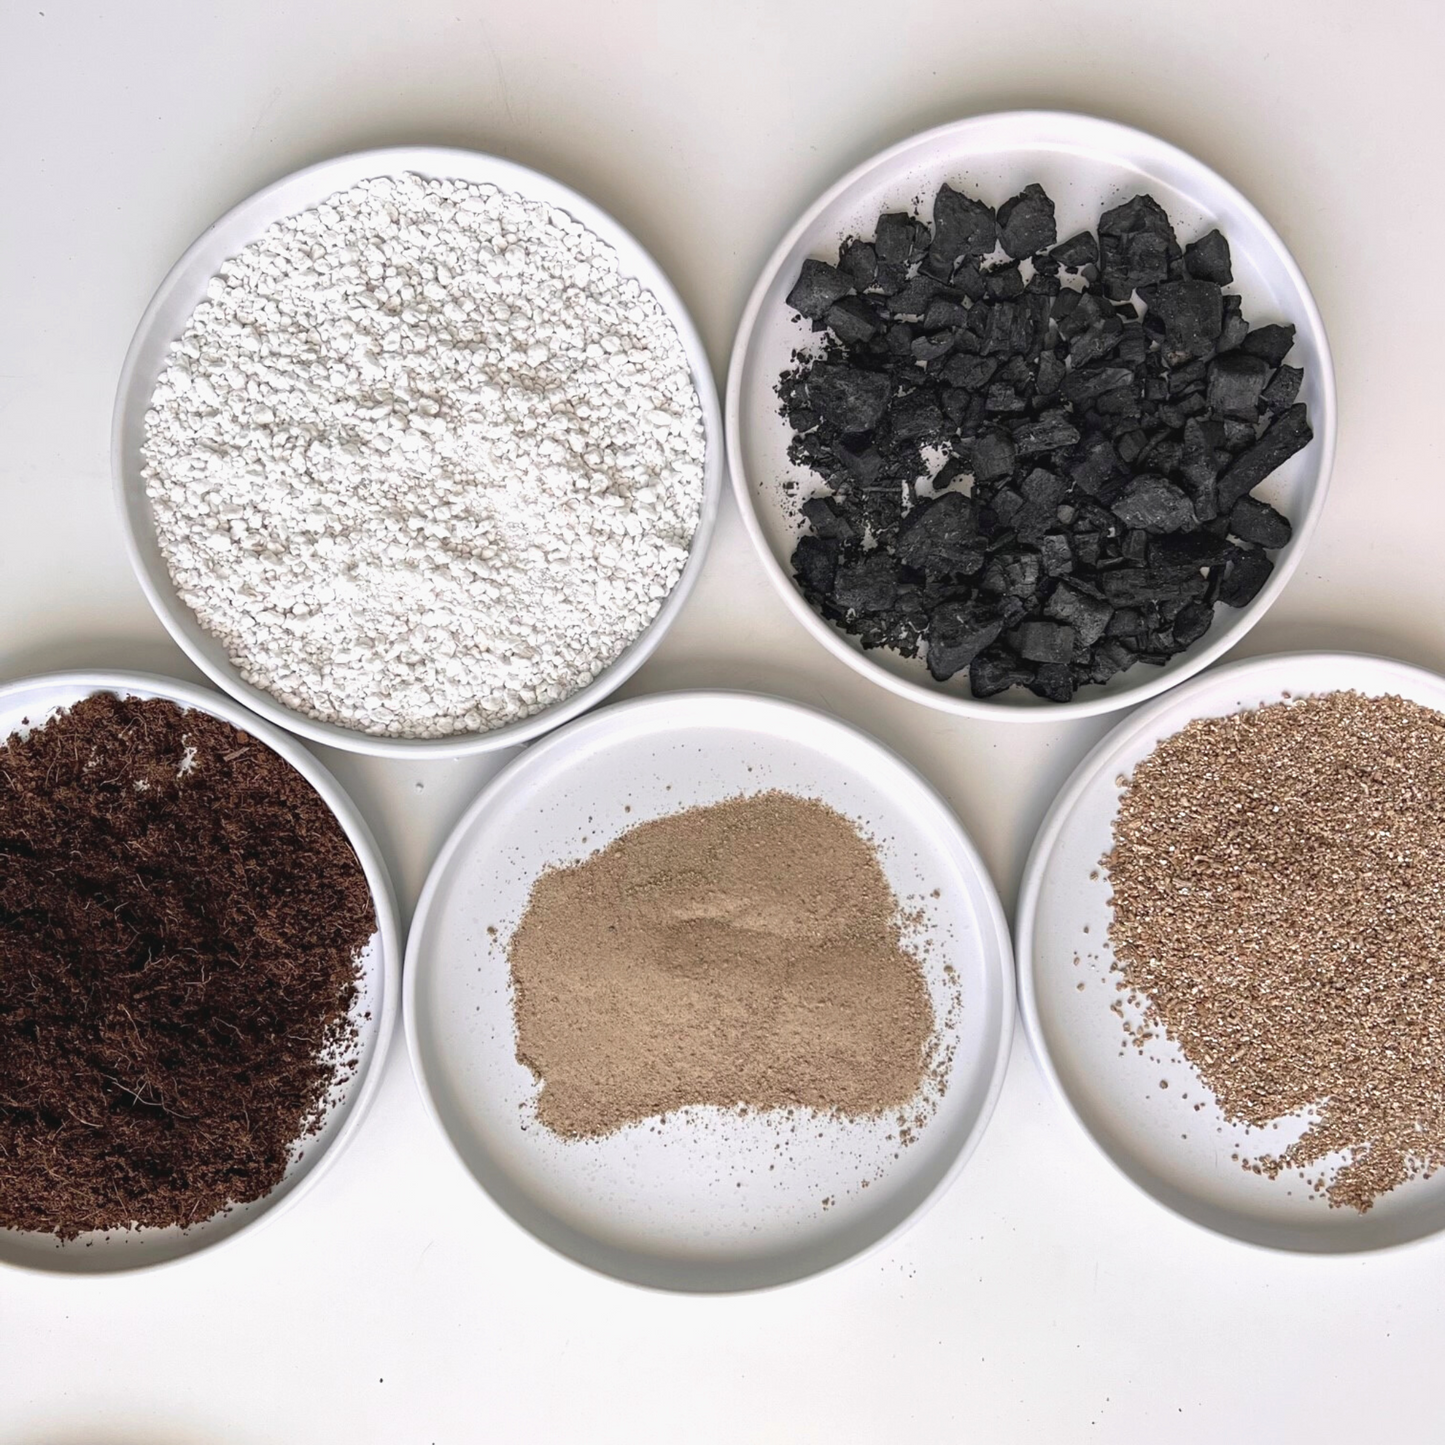 A ingredient makeup of Birdy's Plants Premium Cactus + Succulent Soil Mix including horticultural sand, vermiculite, activated horticultural charcoal, coarse perlite, coco coir.